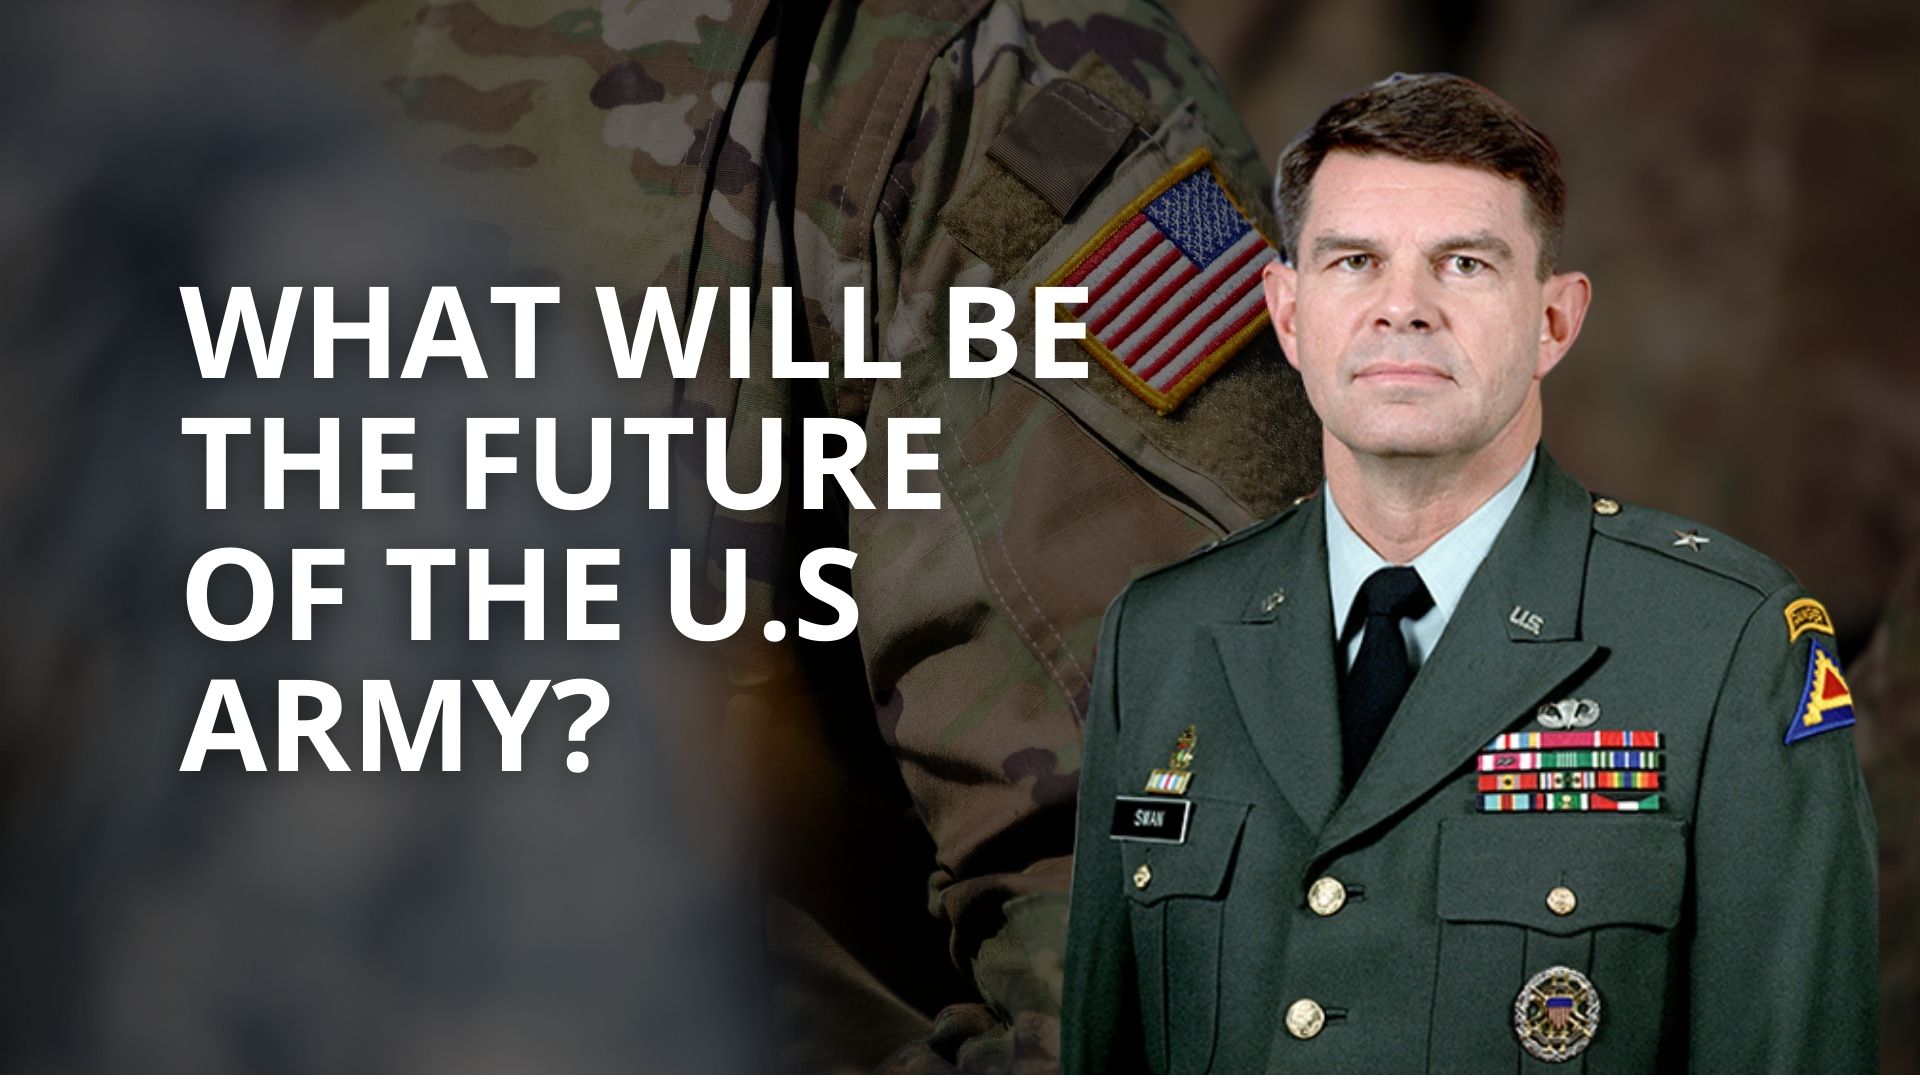 LG Guy C. Swan, The Future of the U.S. Army